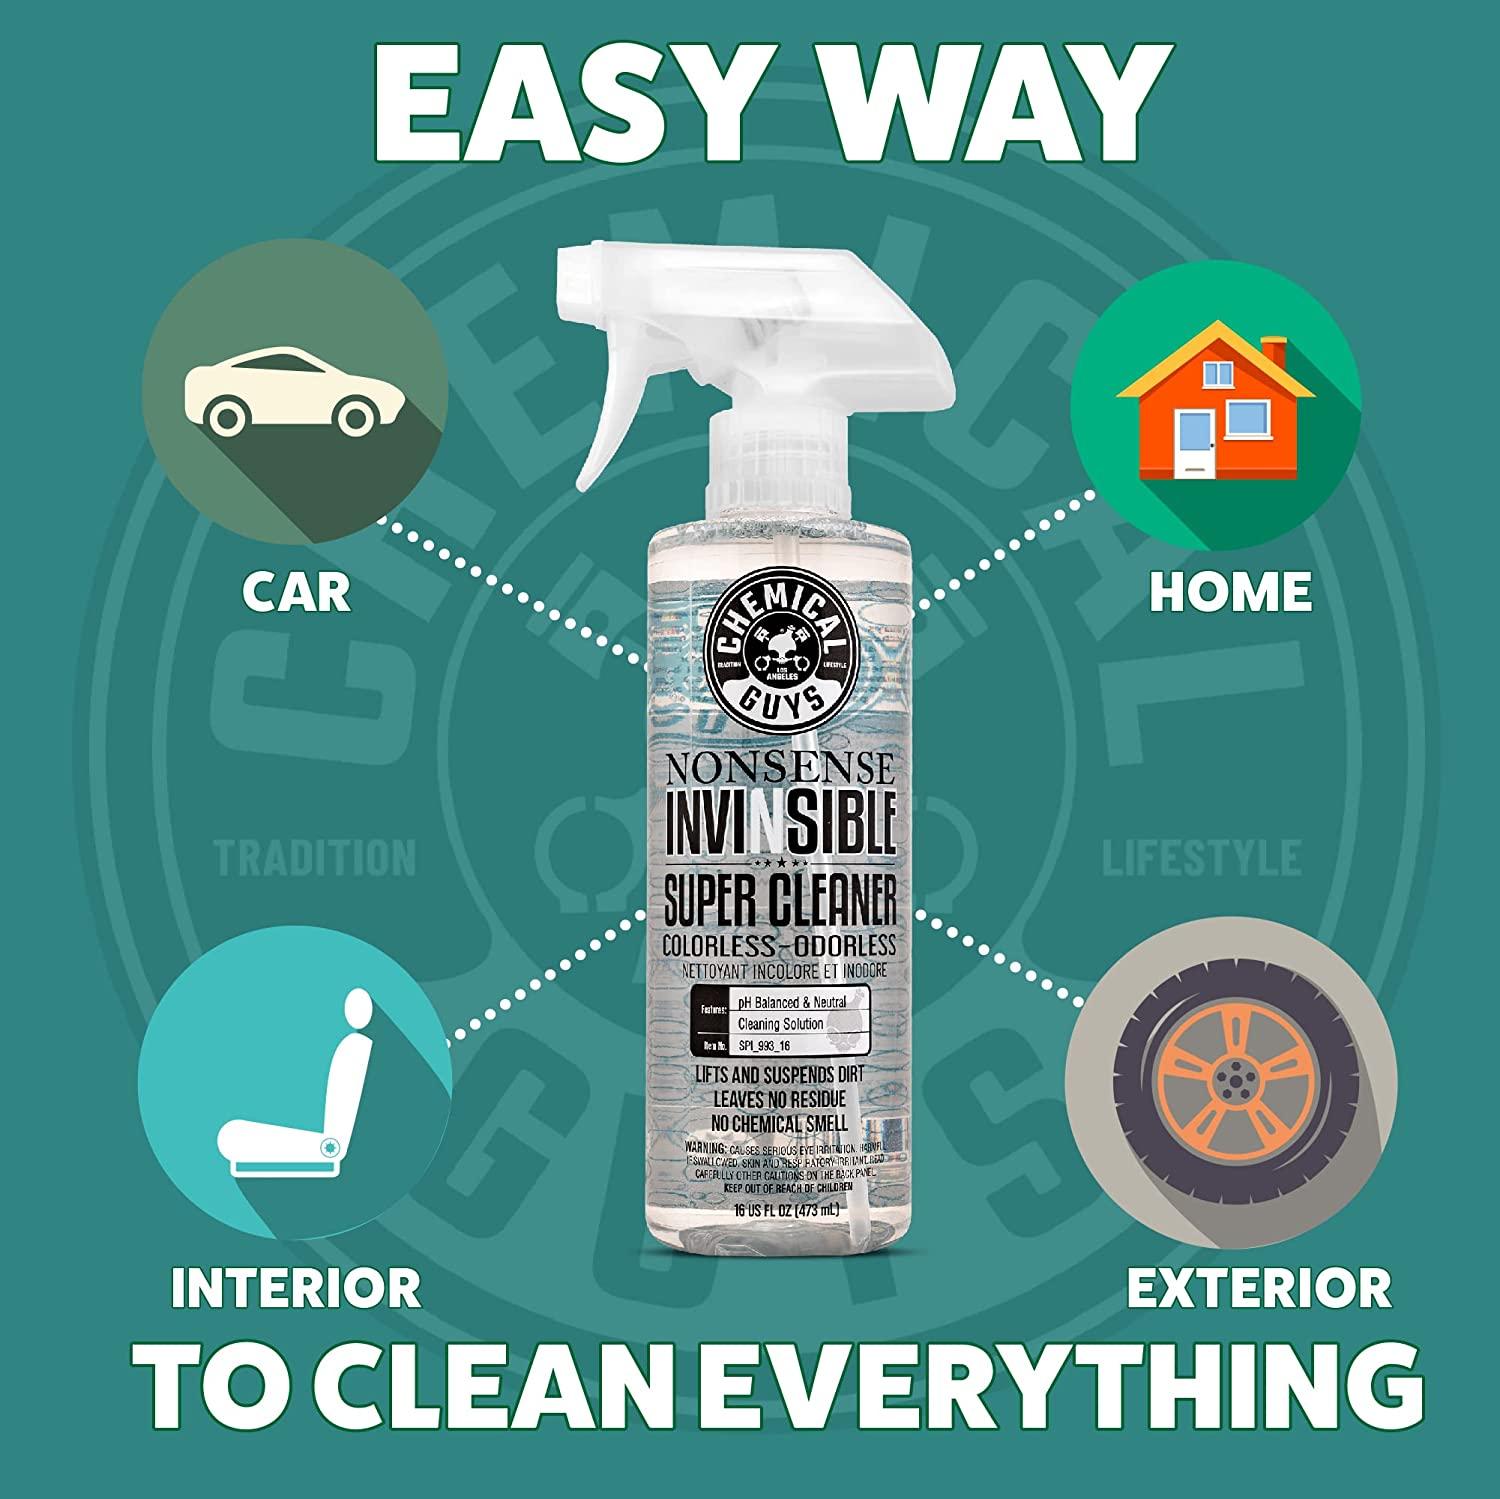 Chemical Guys SPI_993_16 Nonsense All Surface Cleaner (Works on Vinyl,  Rubber, Plastic, Carpet & More) Safe for Home, Garage, Cars, Trucks, SUVs,  Jeeps, Motorcycles, RVs & More, 16 fl. Oz, Unscented Nonsense